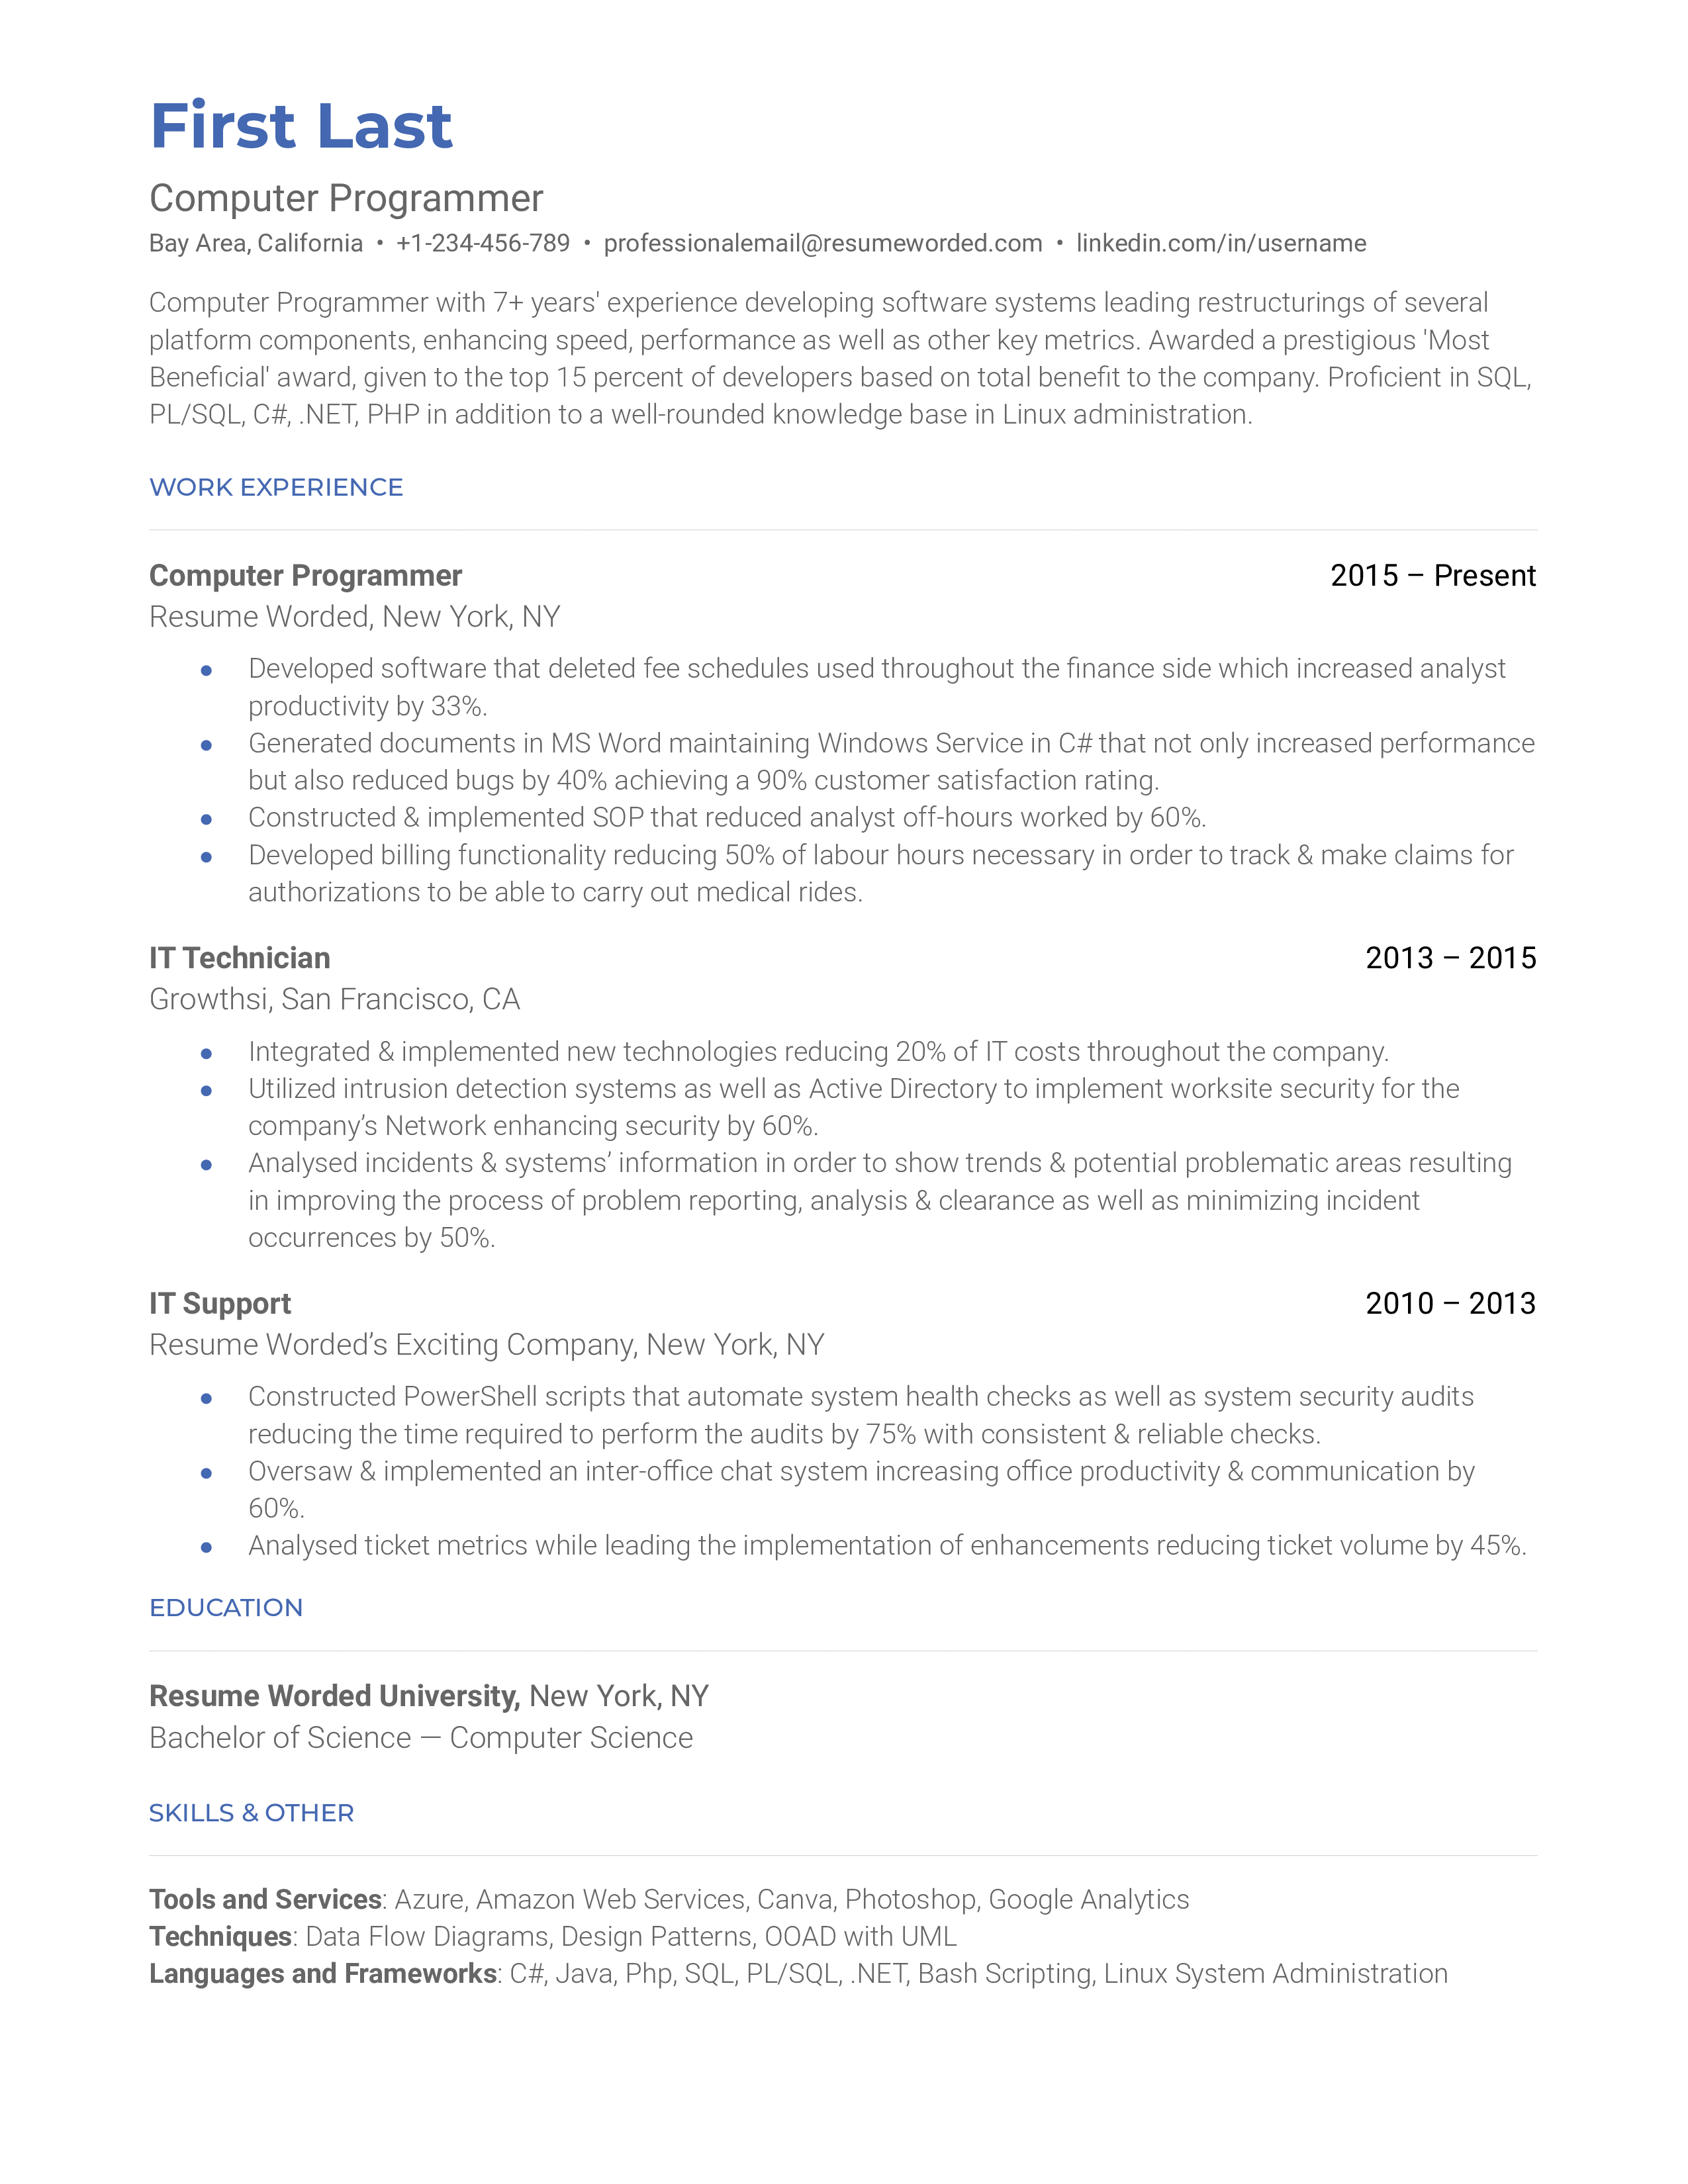 A cronological computer programmer resume template that includes education and skills